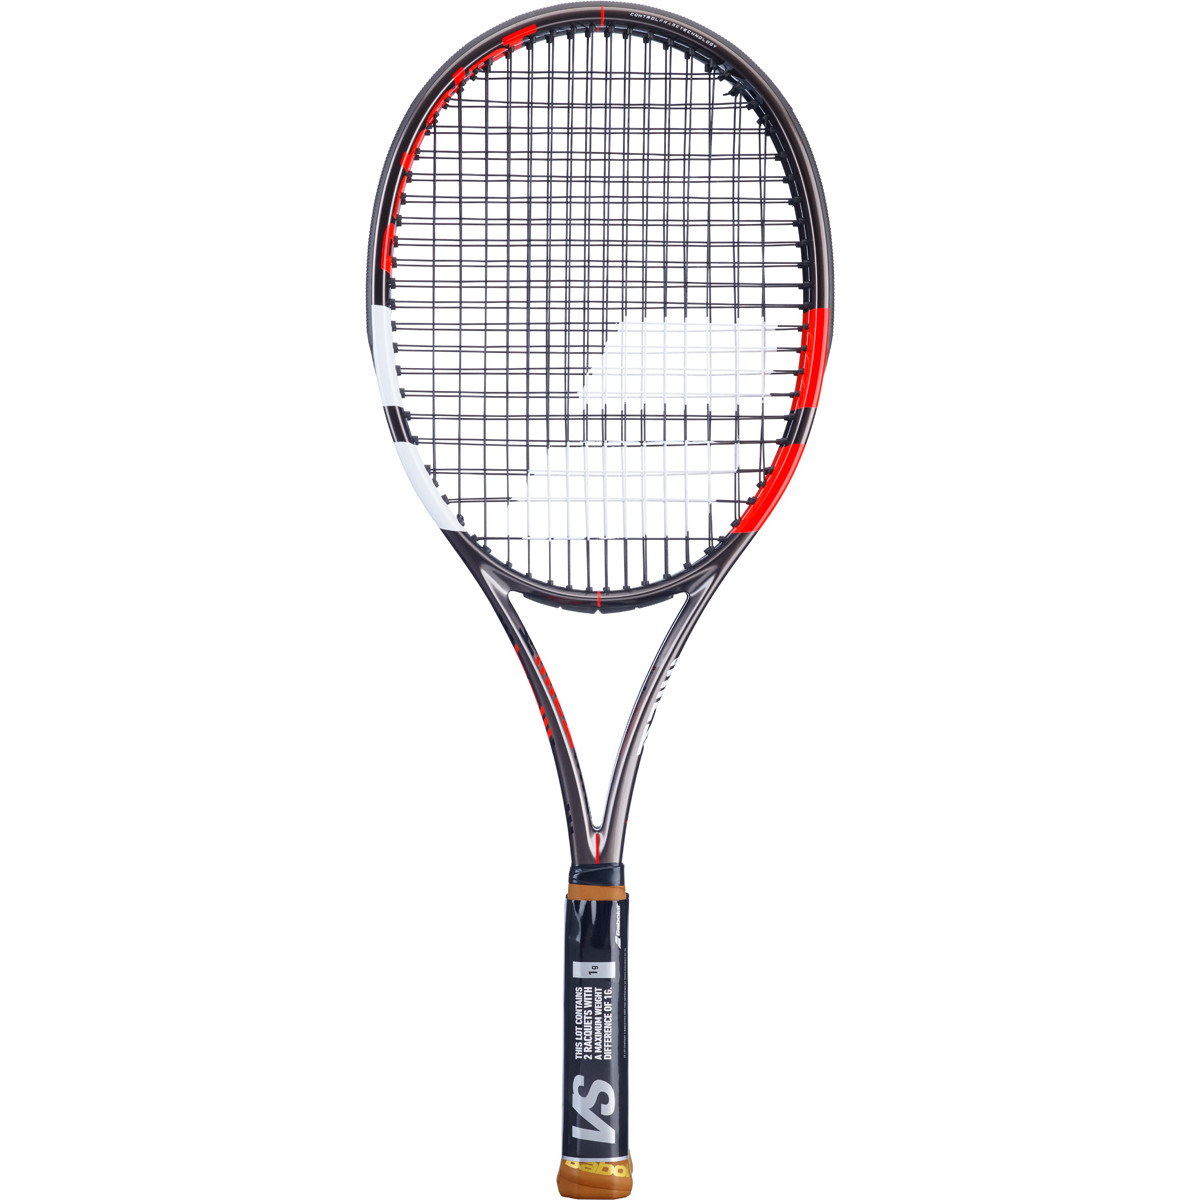 PACK OF 2 BABOLAT PURE STRIKE VS RACQUETS (310 GR) - BABOLAT